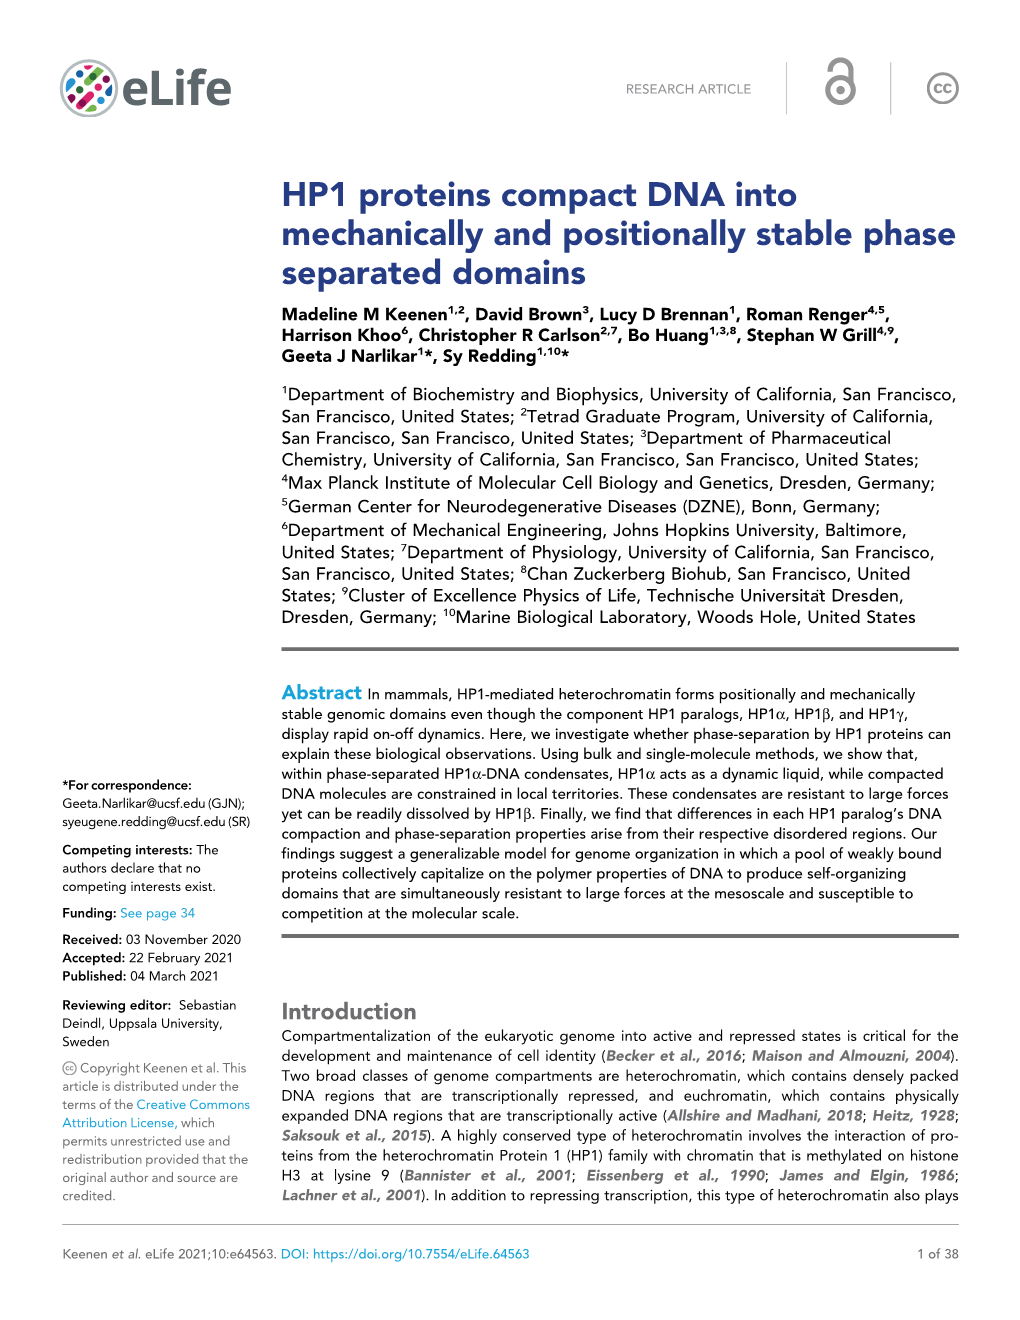 HP1 Proteins Compact DNA Into Mechanically and Positionally Stable Phase Separated Domains